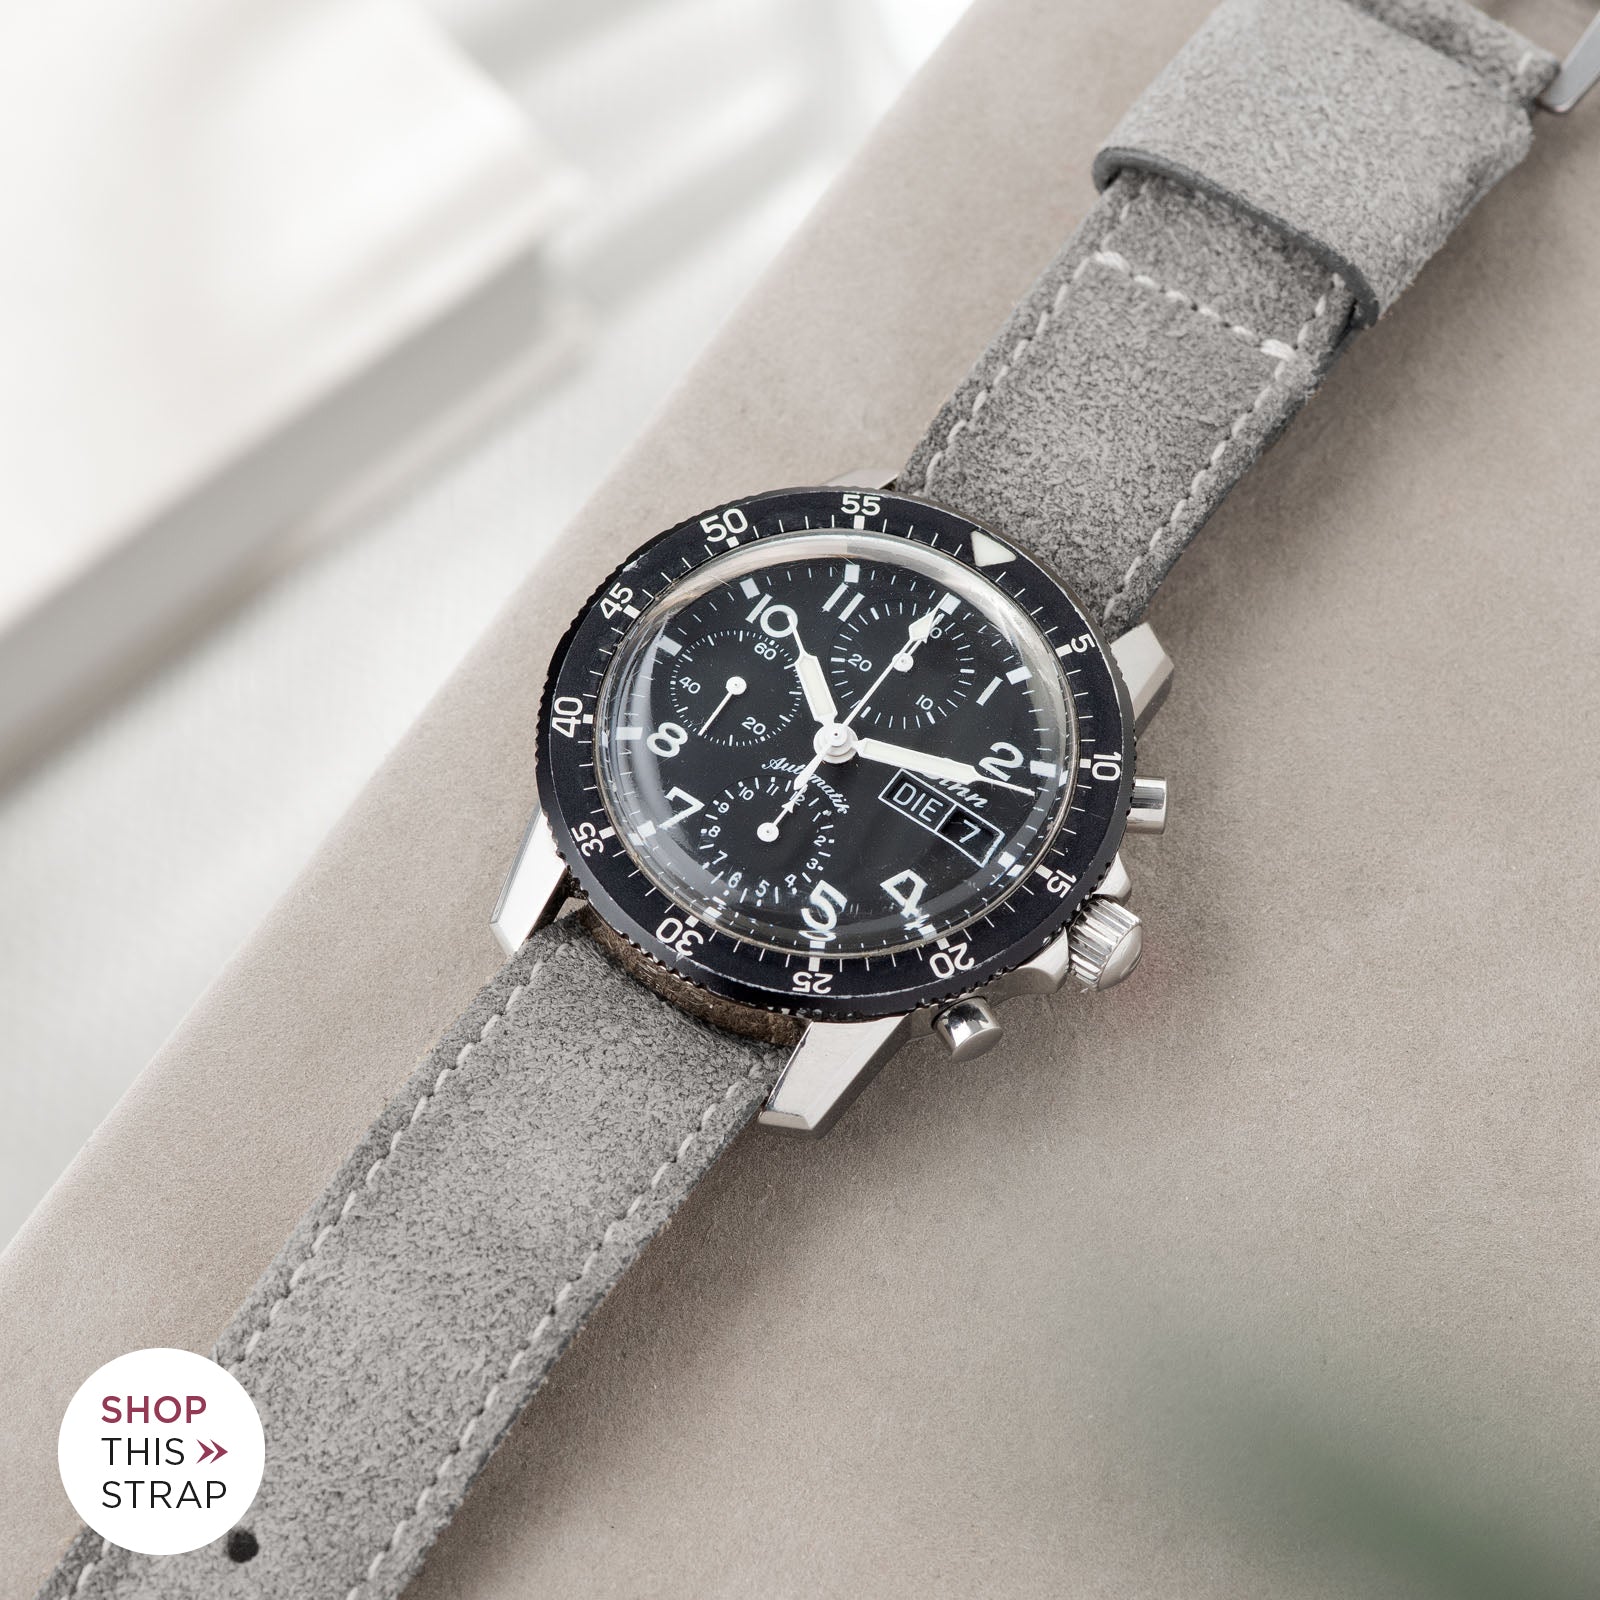 Bulang and Sons_Strap Guide_Sinn 103St Flieder Chronograph_One Piece Nato Rugged Grey Leather Watch Strap